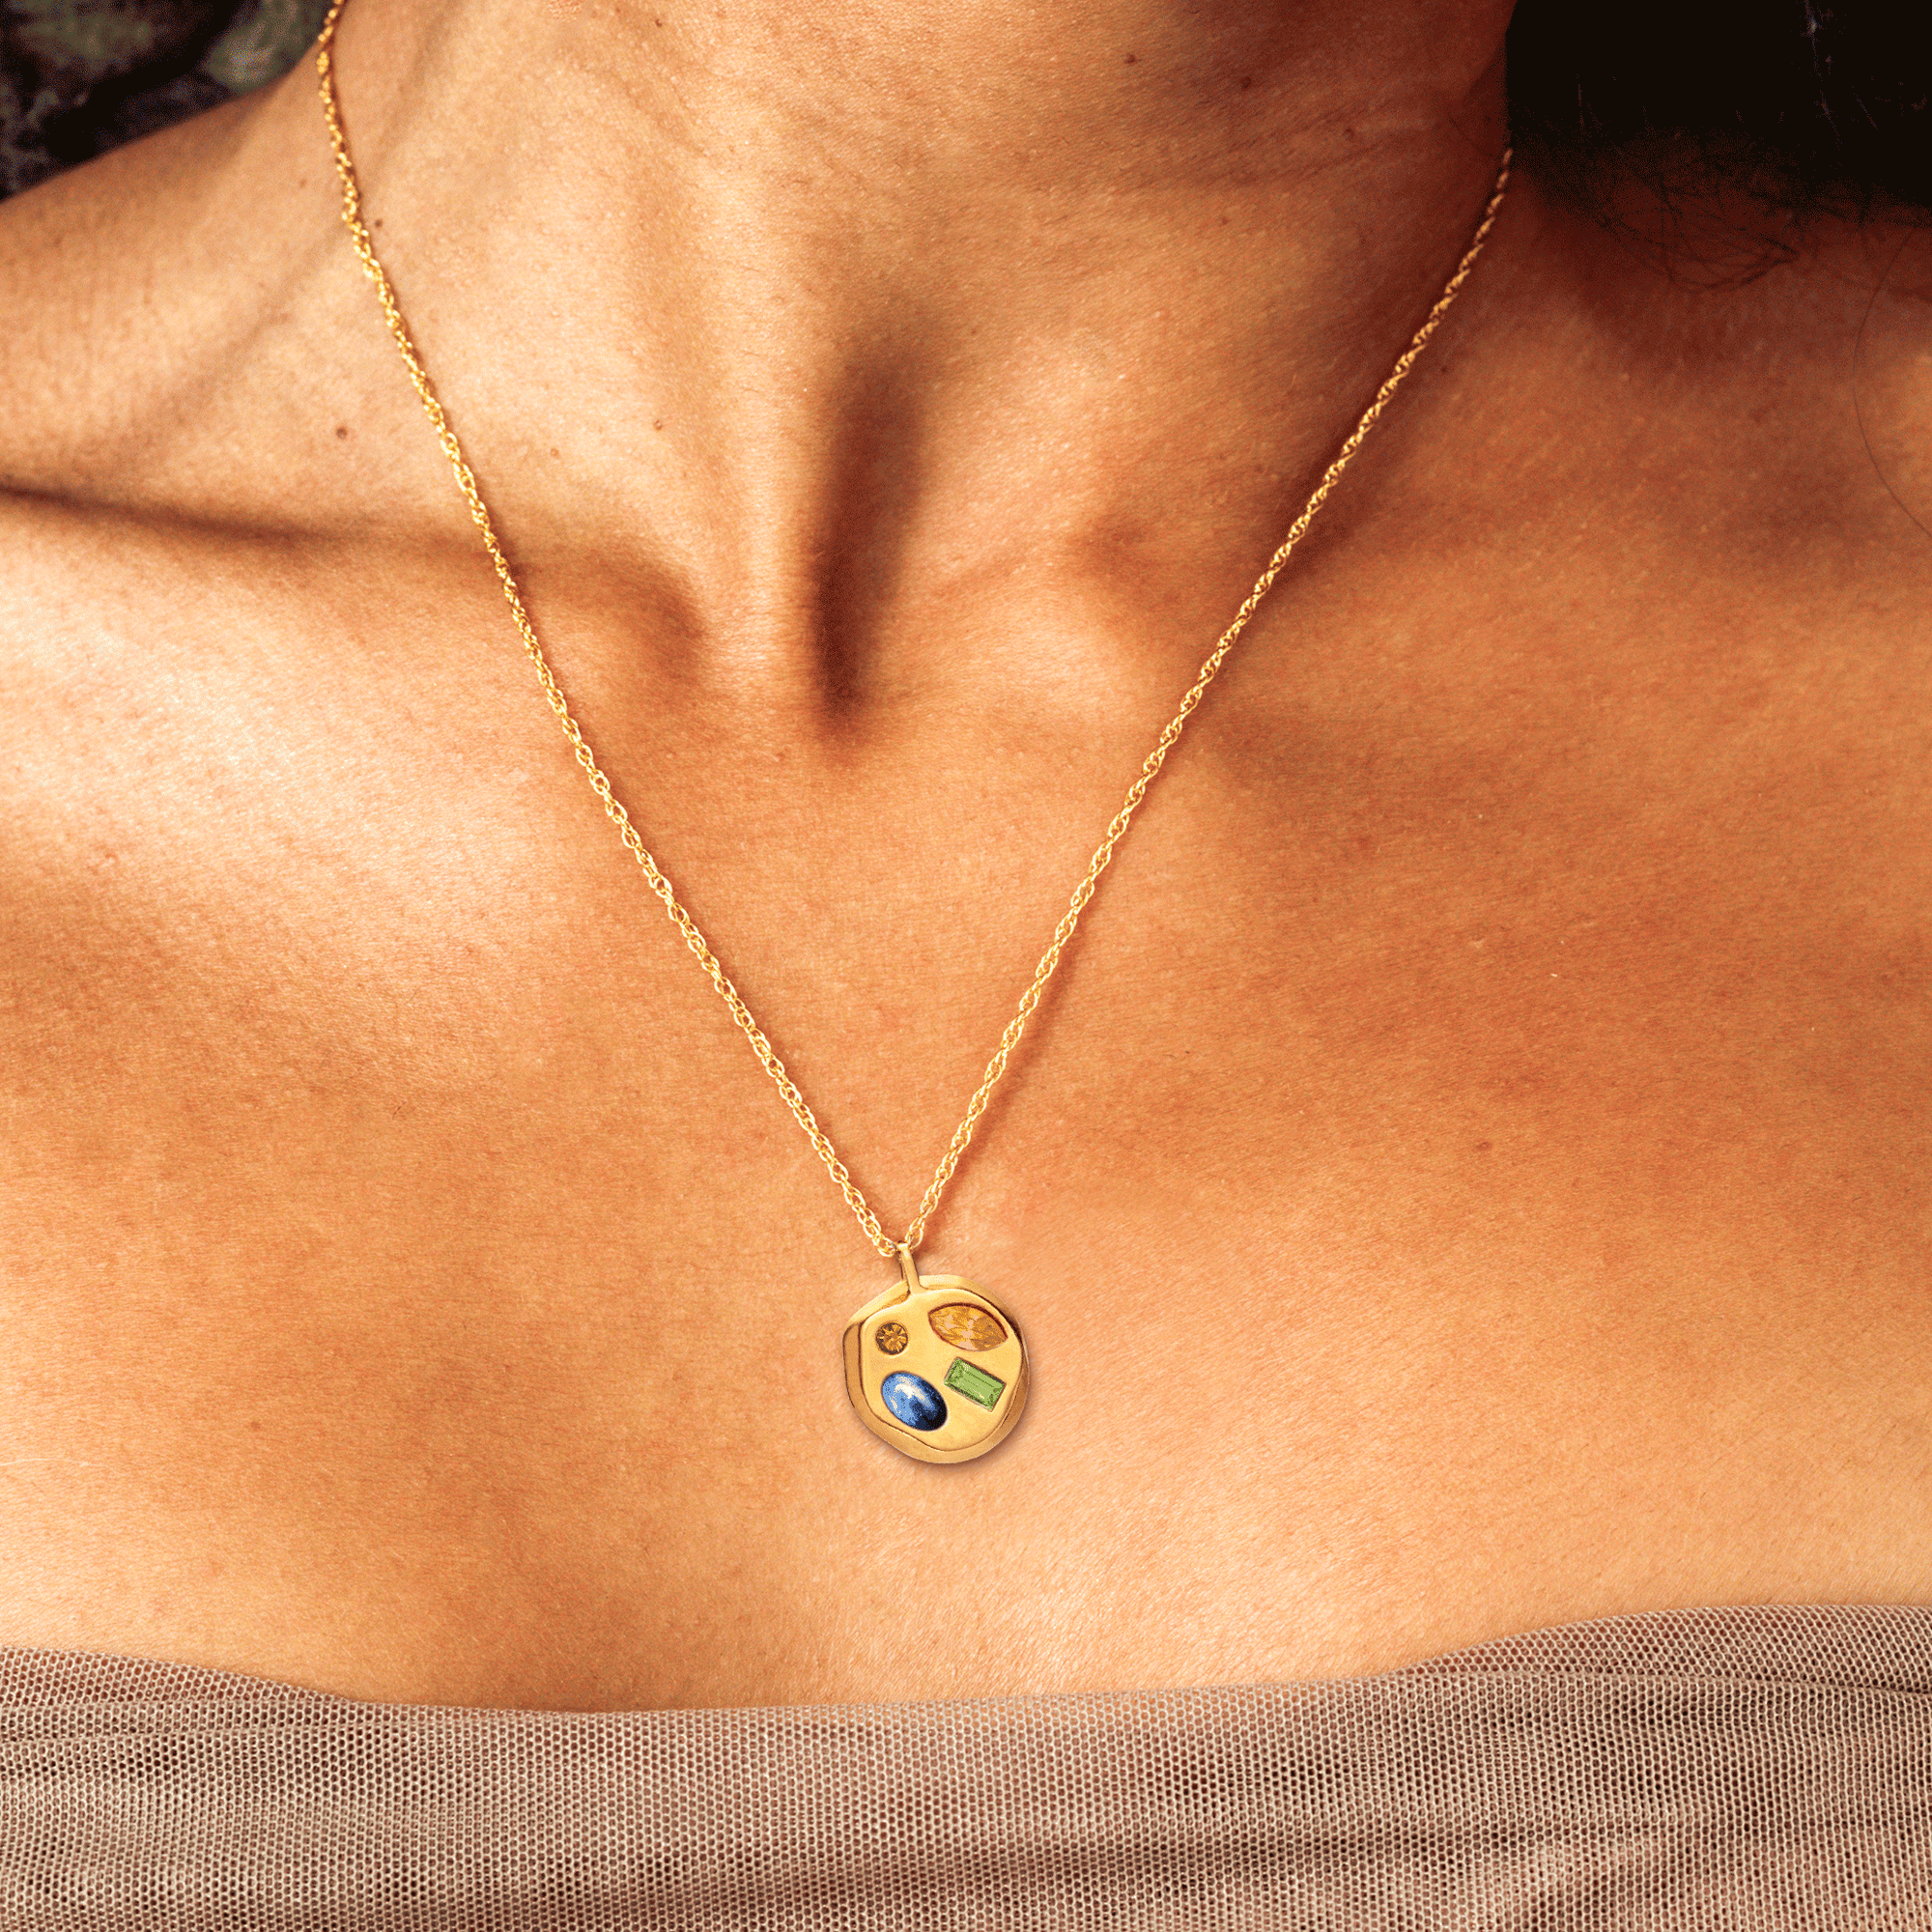 Person wearing The November Eighth Pendant